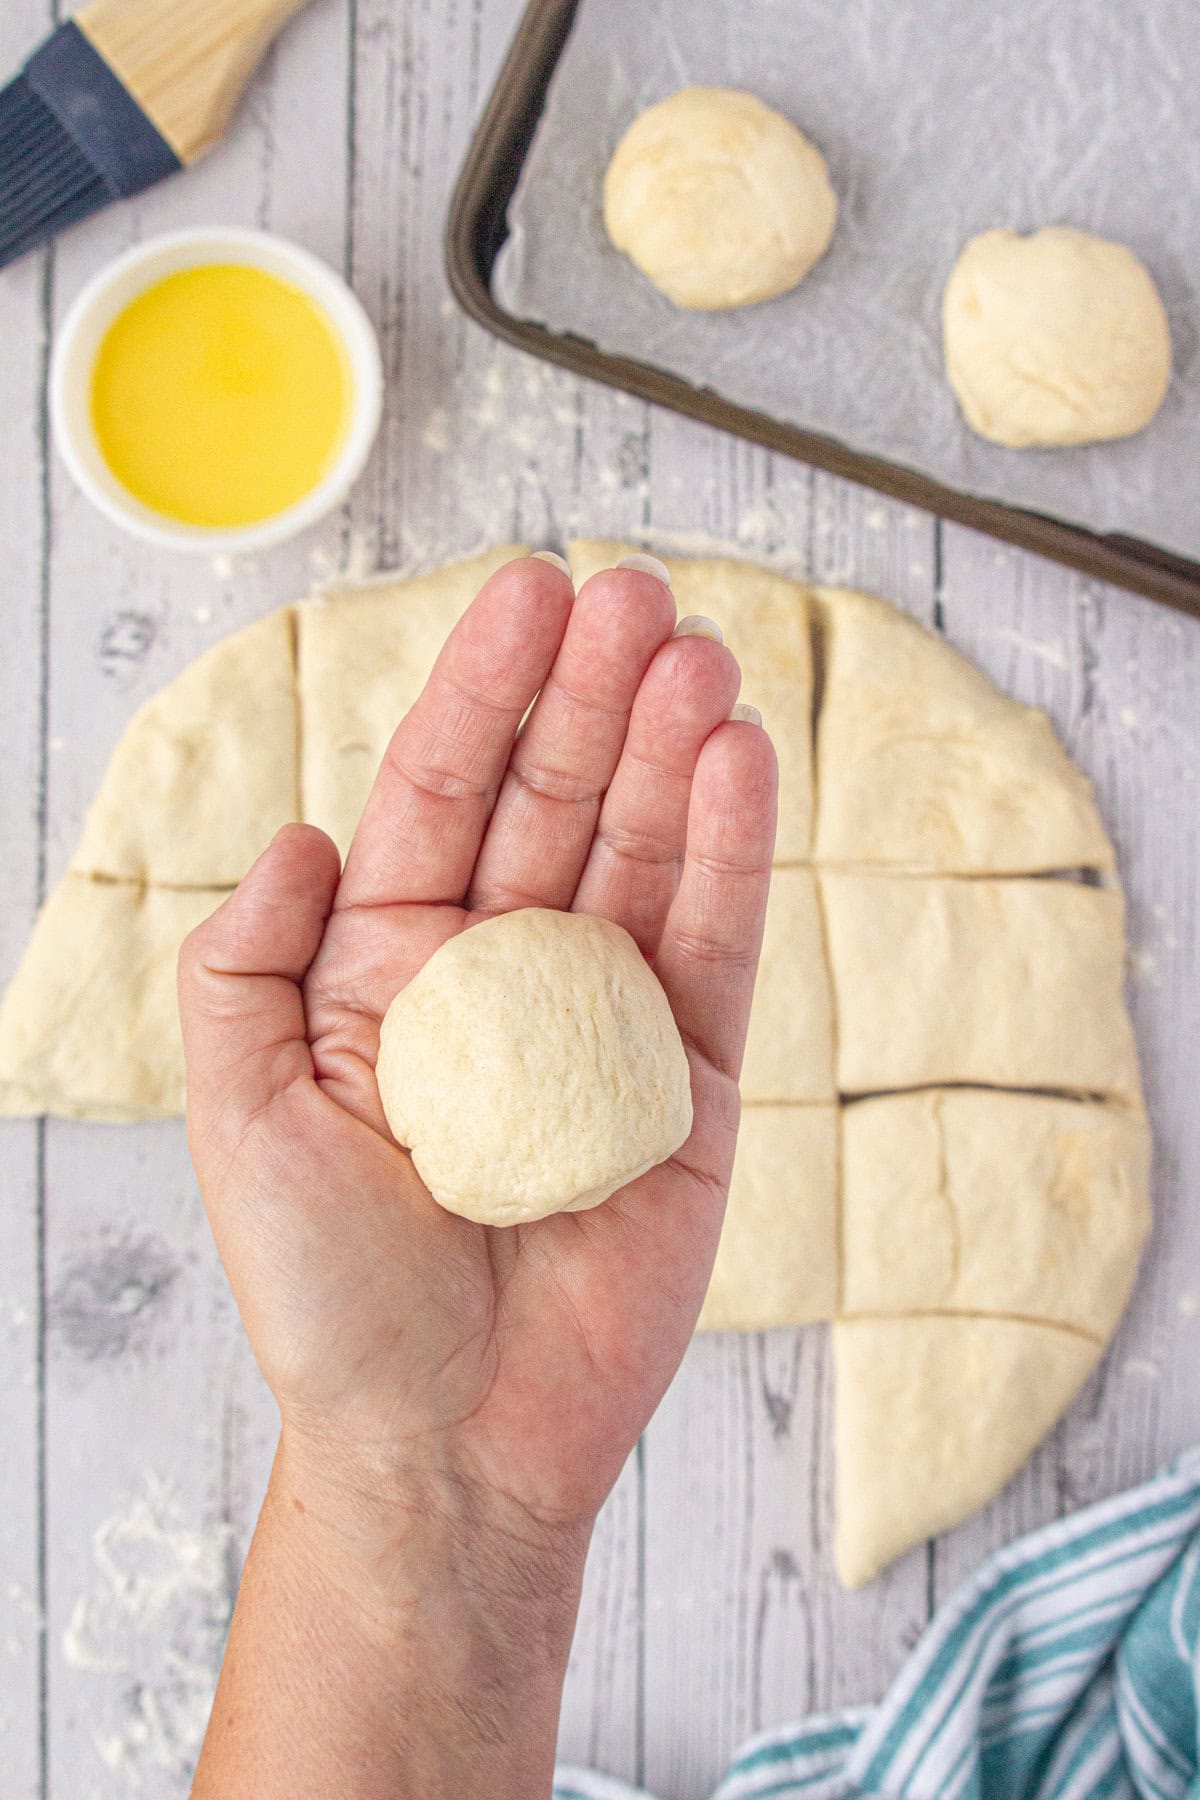 Forming the rolls with the dough.